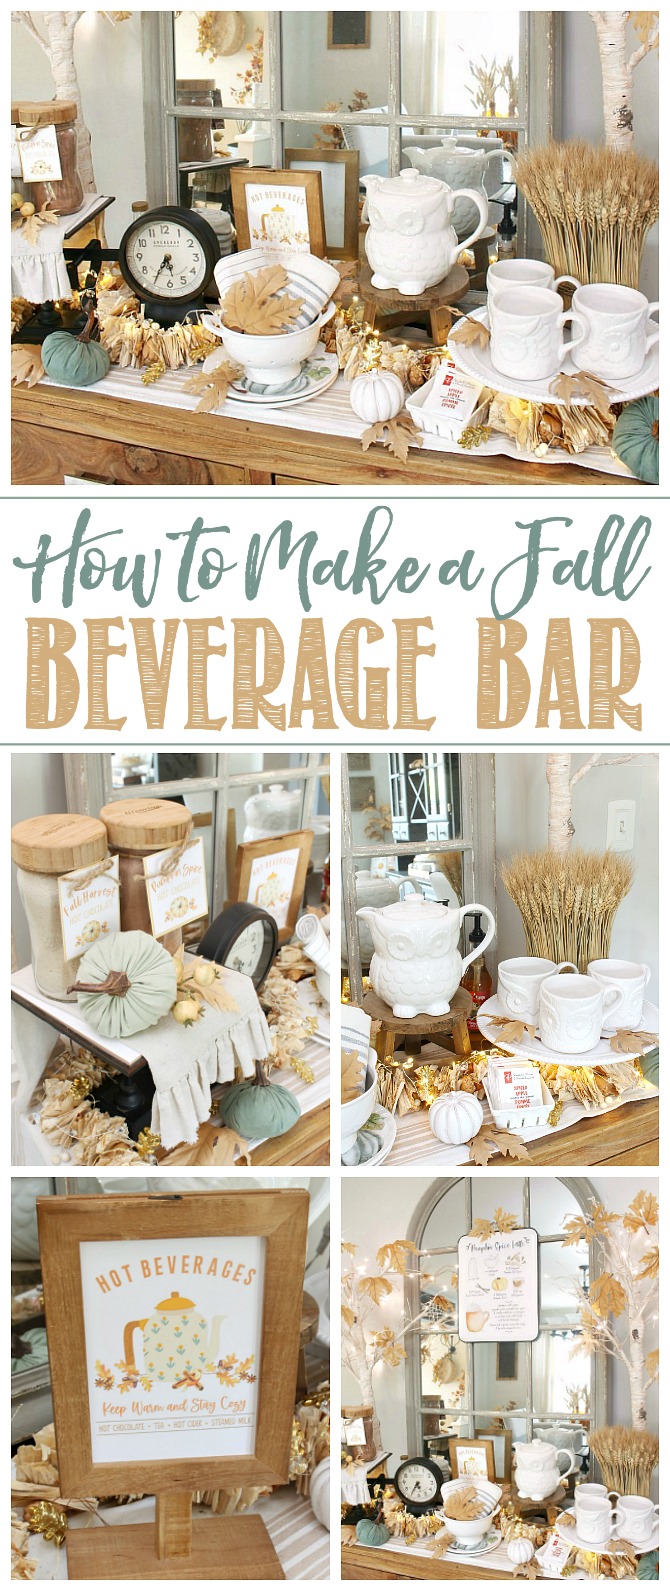 Ideas for how to make a beverage bar.